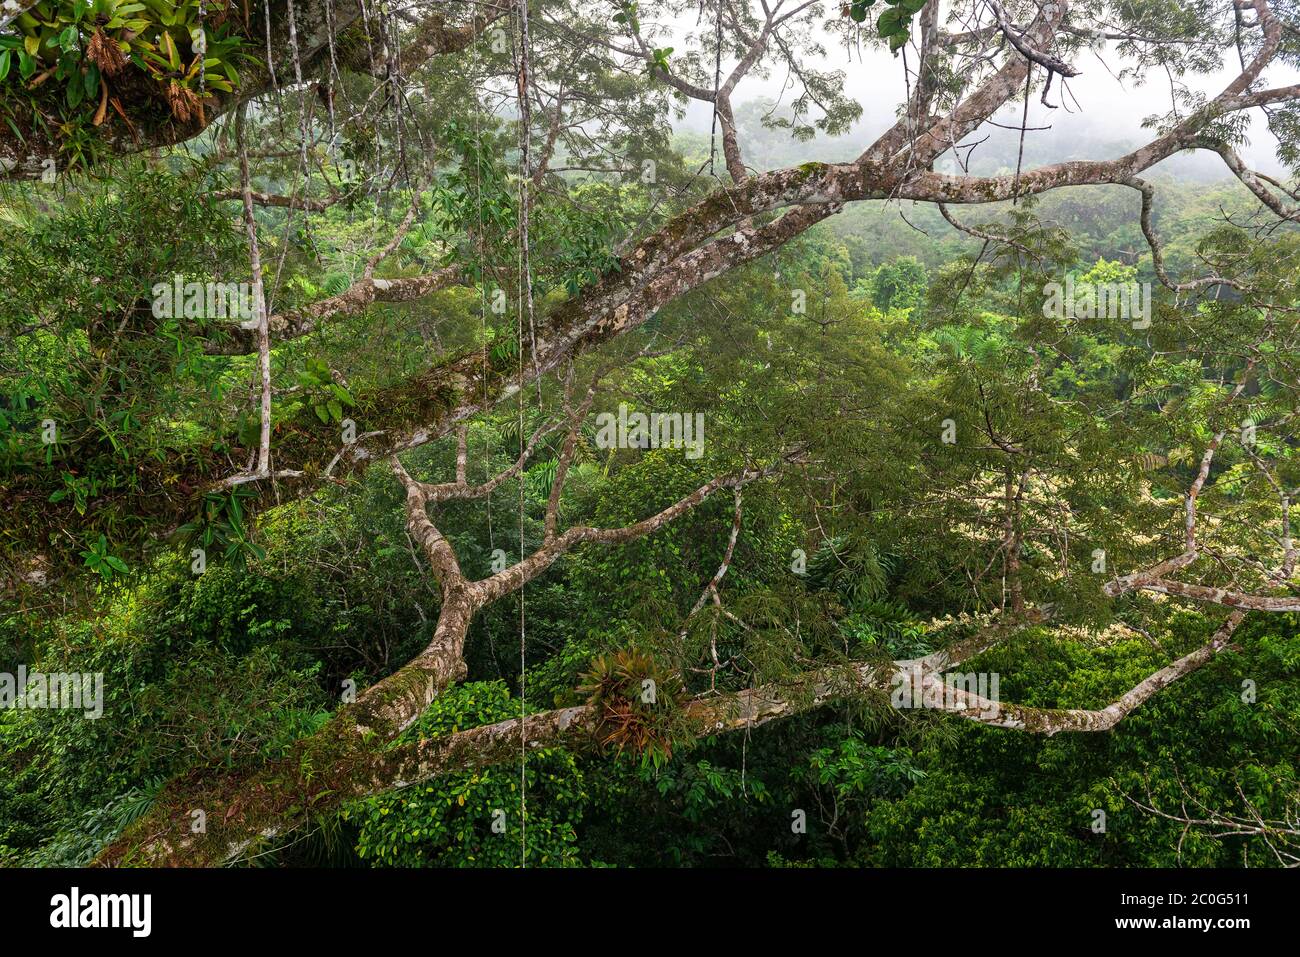 Aerial landscape of the Amazon Rainforest seen from inside a Ceiba tree with many Bromelia on the branches, Yasuni national park, Ecuador. Stock Photo